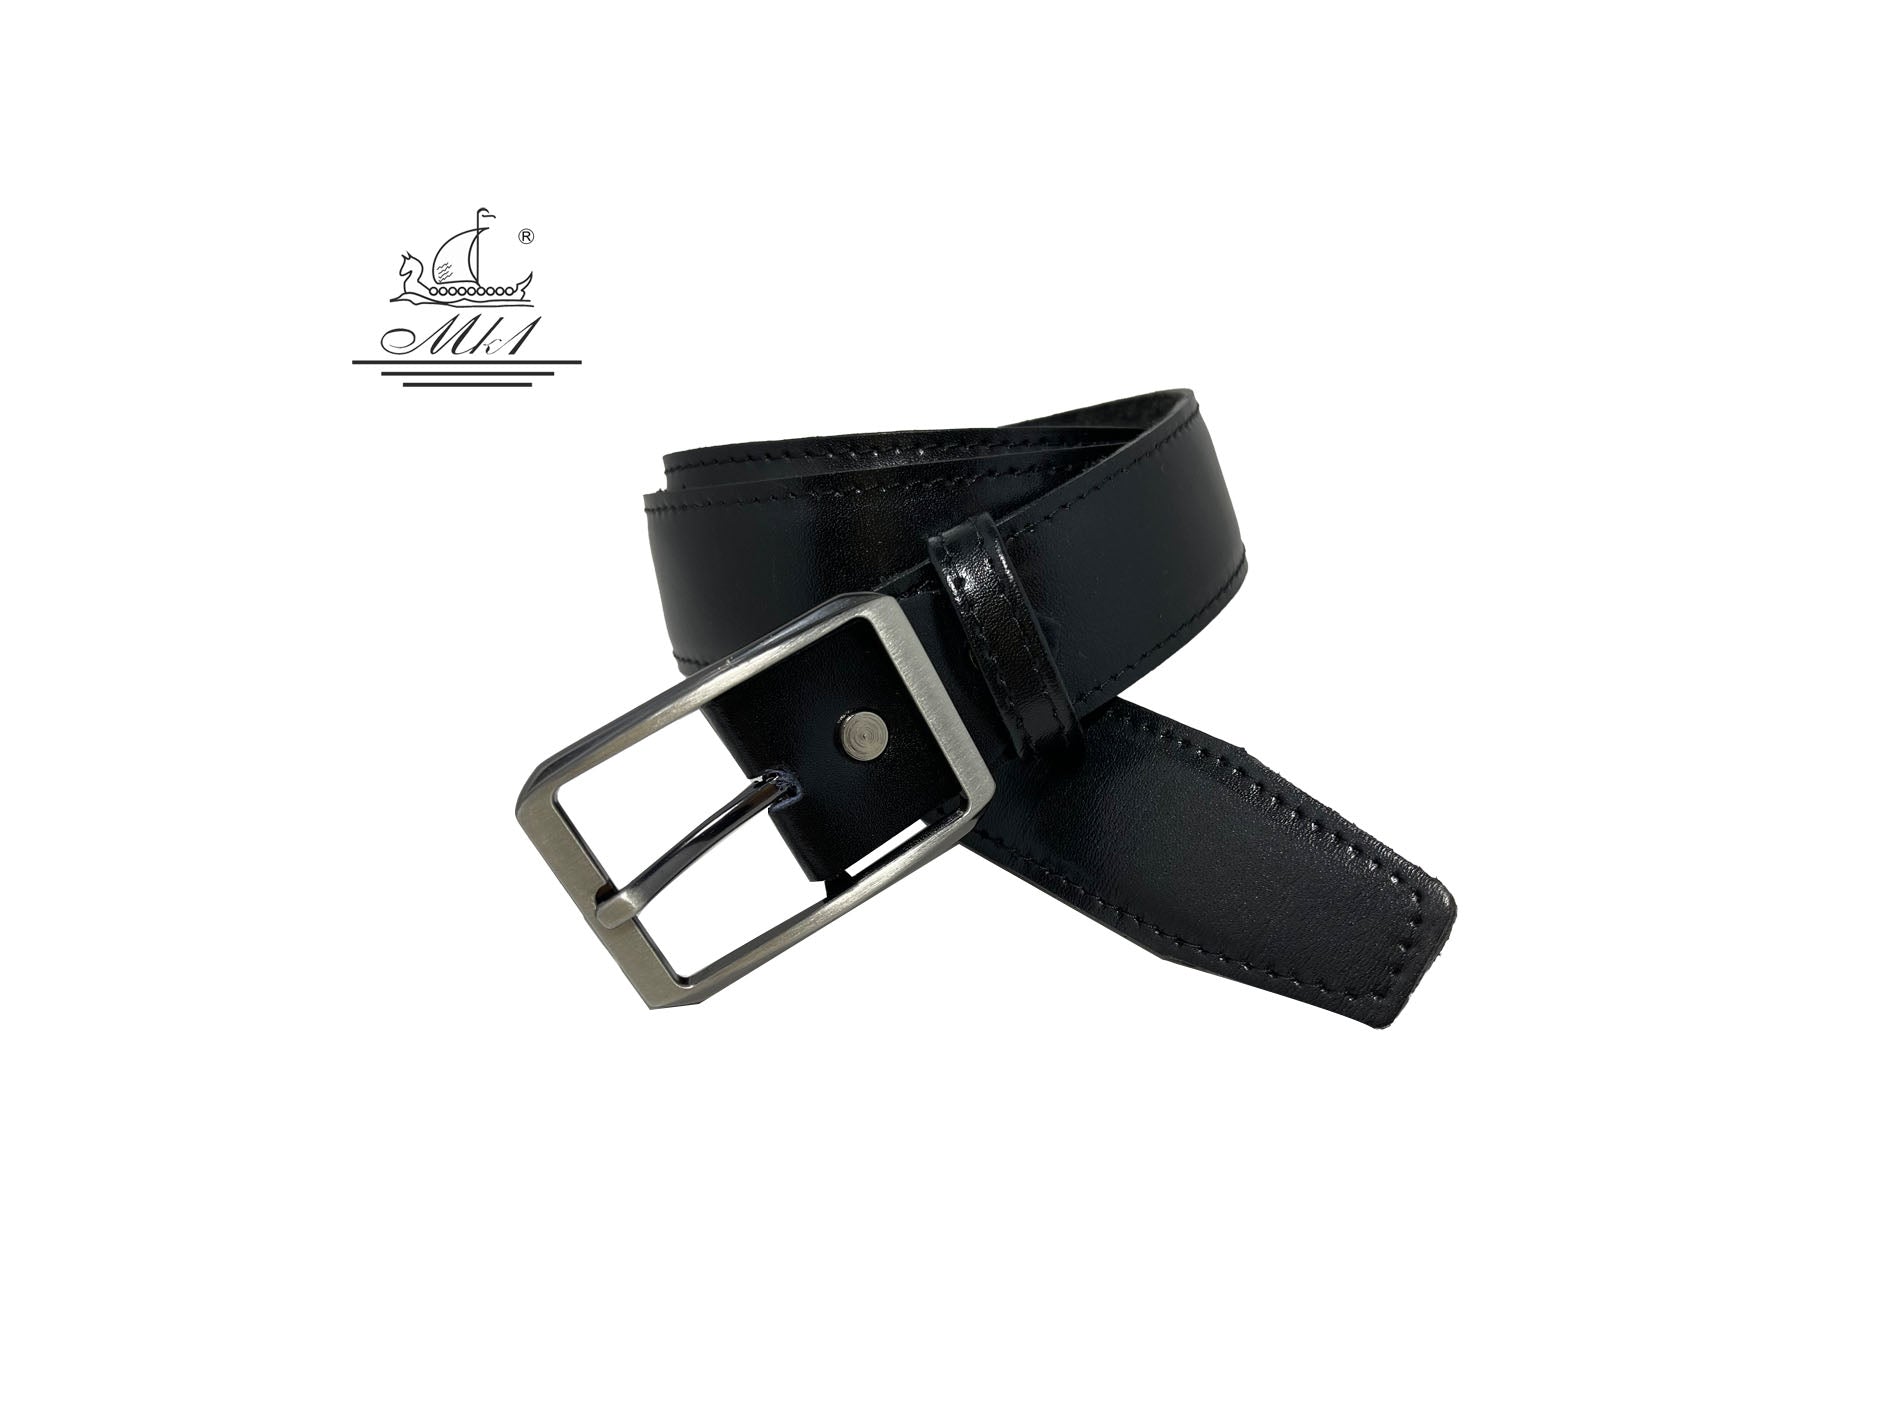 Unisex 3,5cm wide belt handcrafted from black leather with sticking design. A001/35B/DG